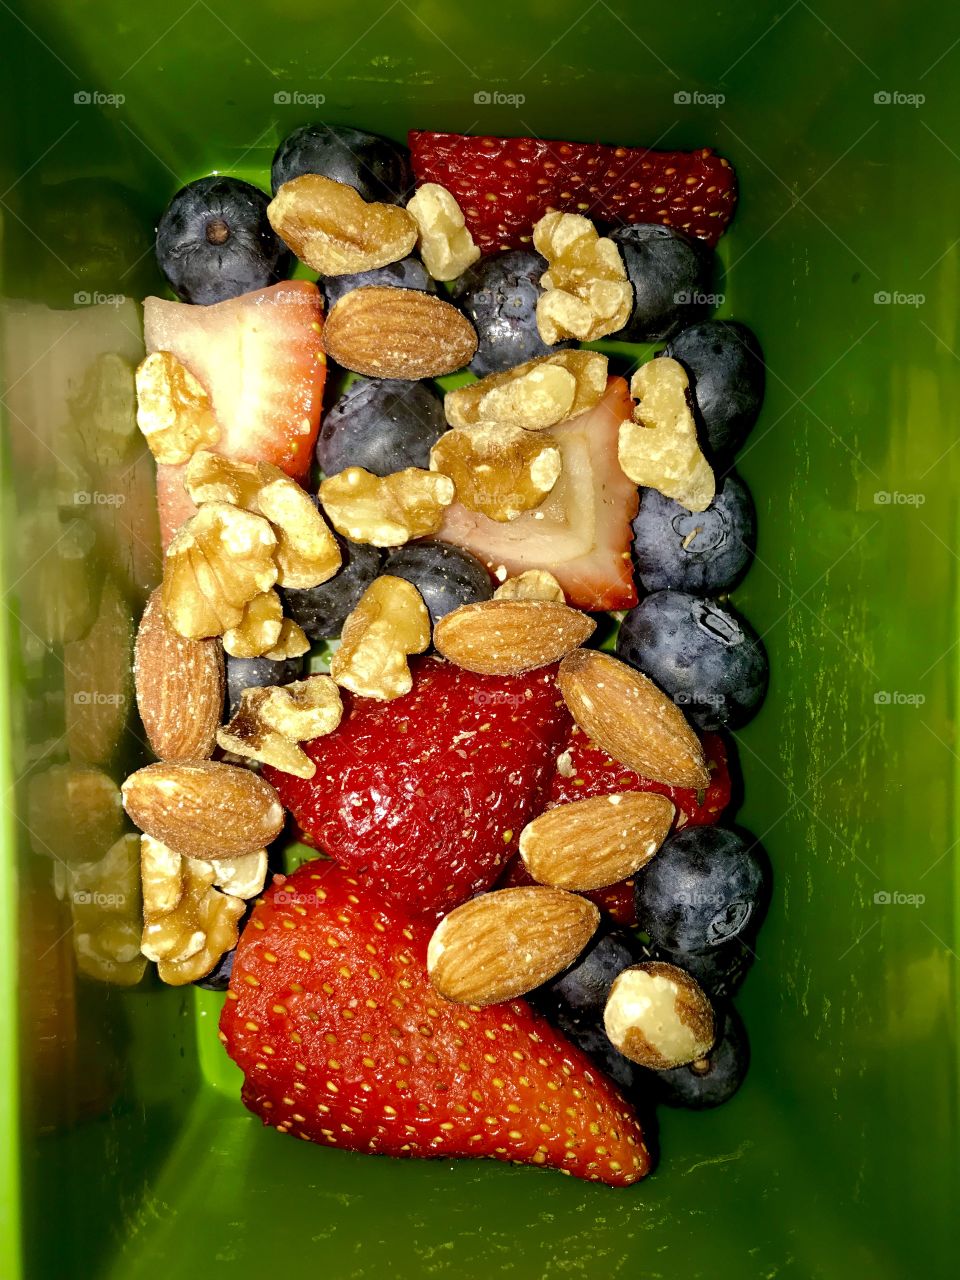 Fruits and nuts are healthy snack